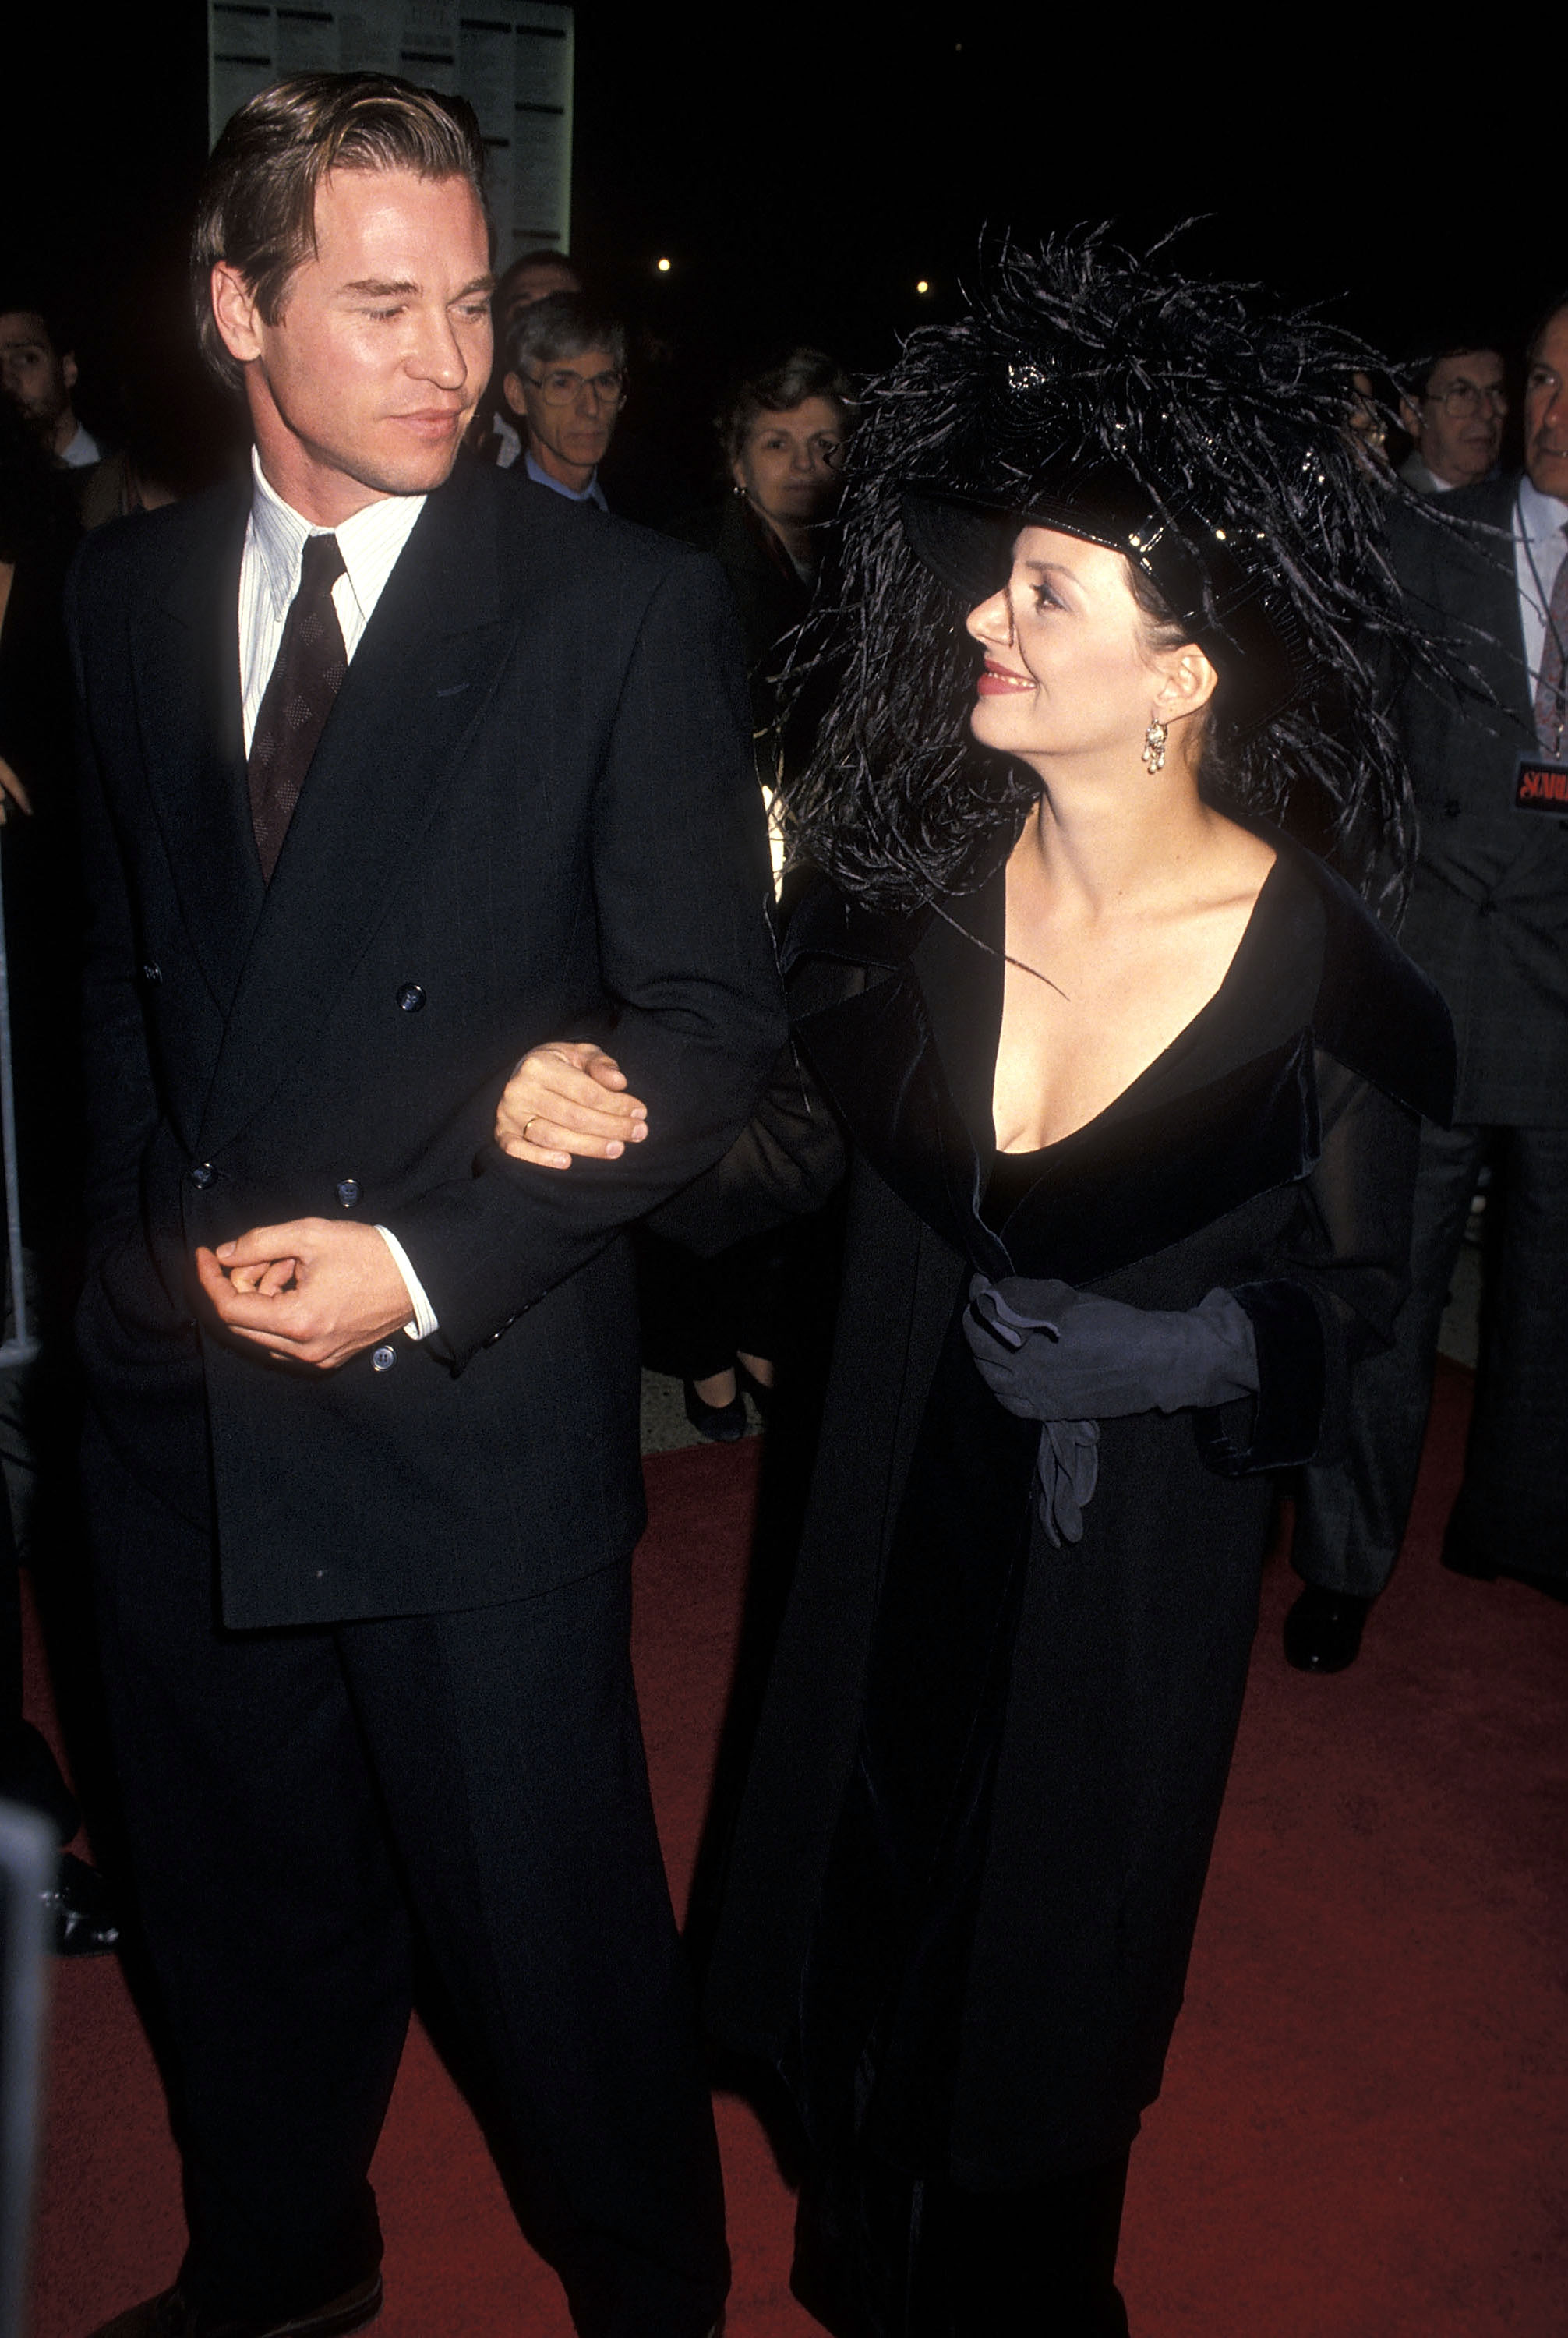 Val Kilmer and Joanne Whalley at the CBS Miniseries "Scarlett" screening on November 3, 1994 | Source: Getty Images